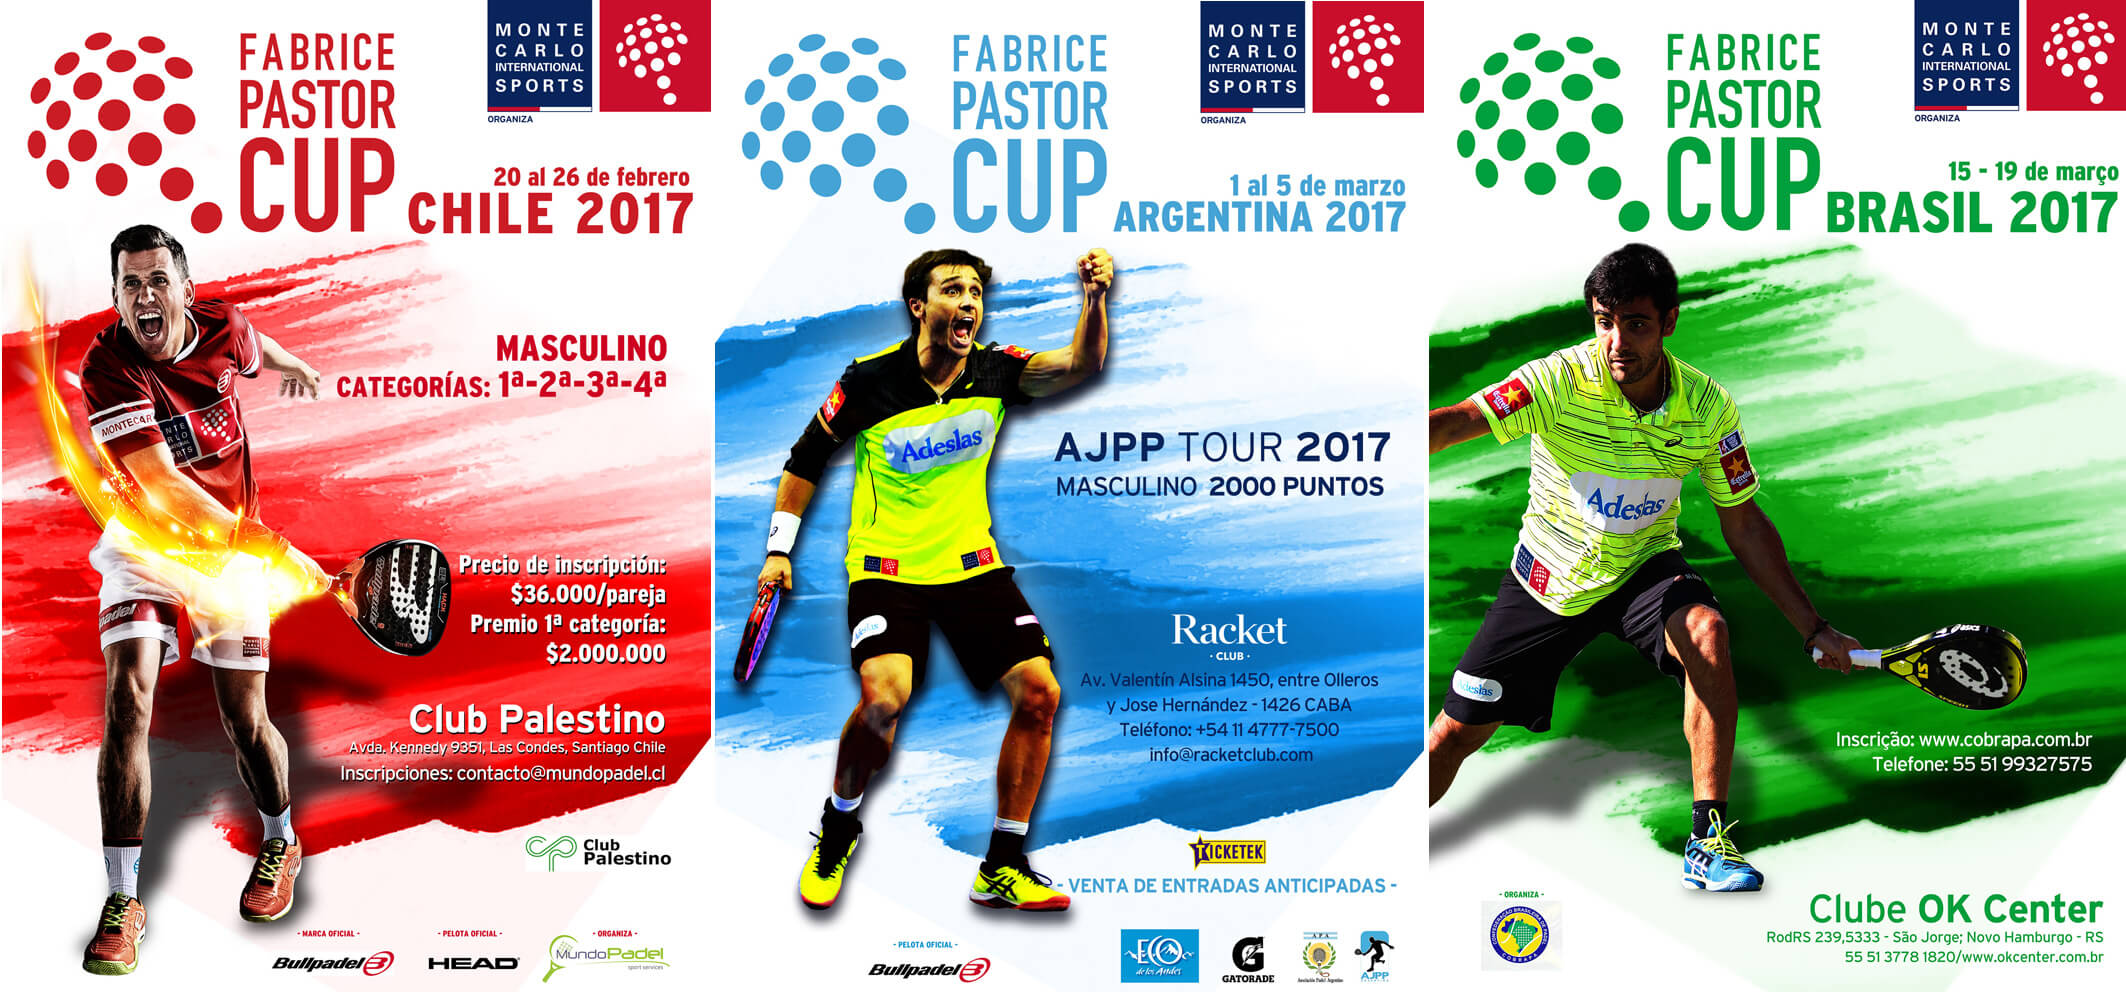 Puchar Fabrice Pastor Cup w Chile, Argentynie i Brazylii